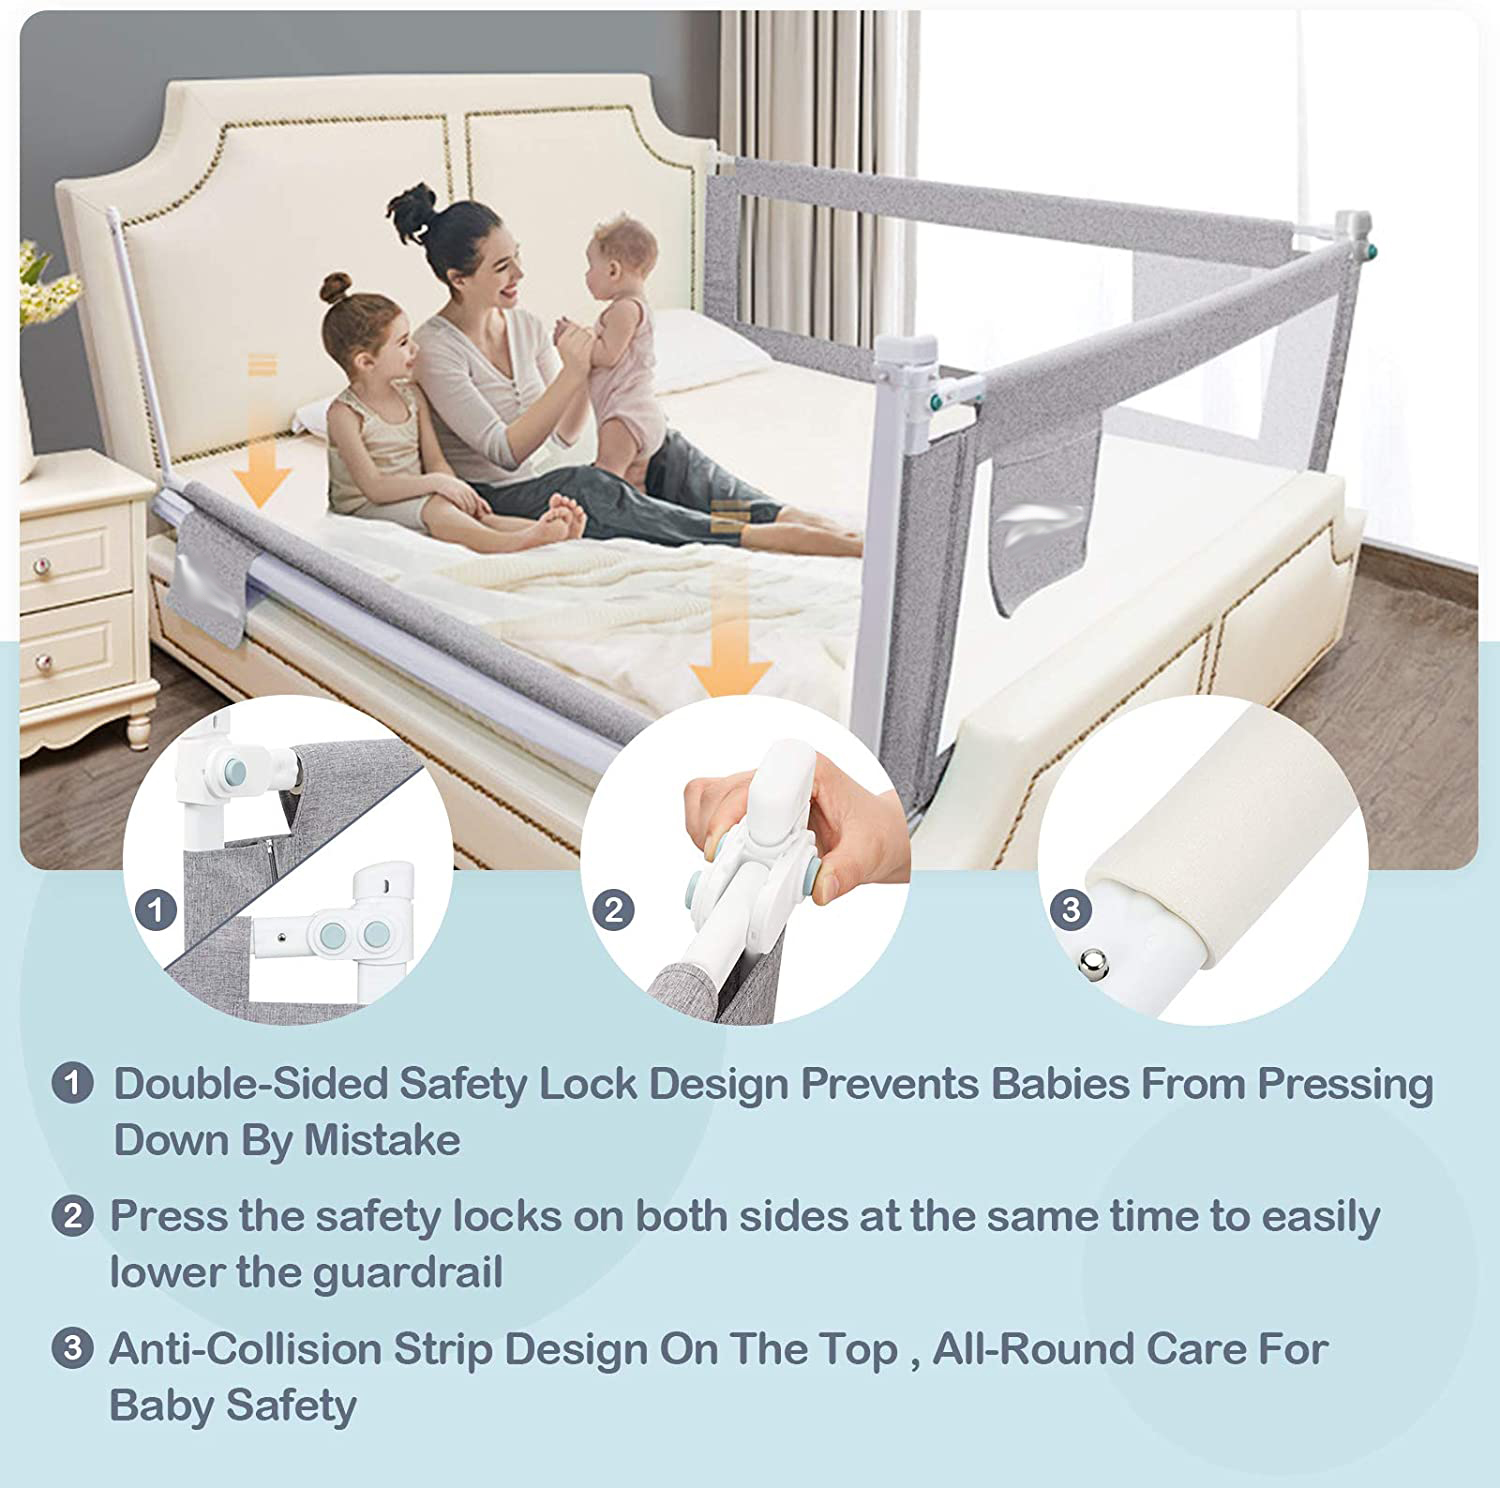 Acplaypen new toddler bed rail guard,Anti-Fall Baby Bed Protection Guard for Toddler Baby and Children Infants Safety Bed Guardrail, Baby Protector Rail with Breathable Fabric